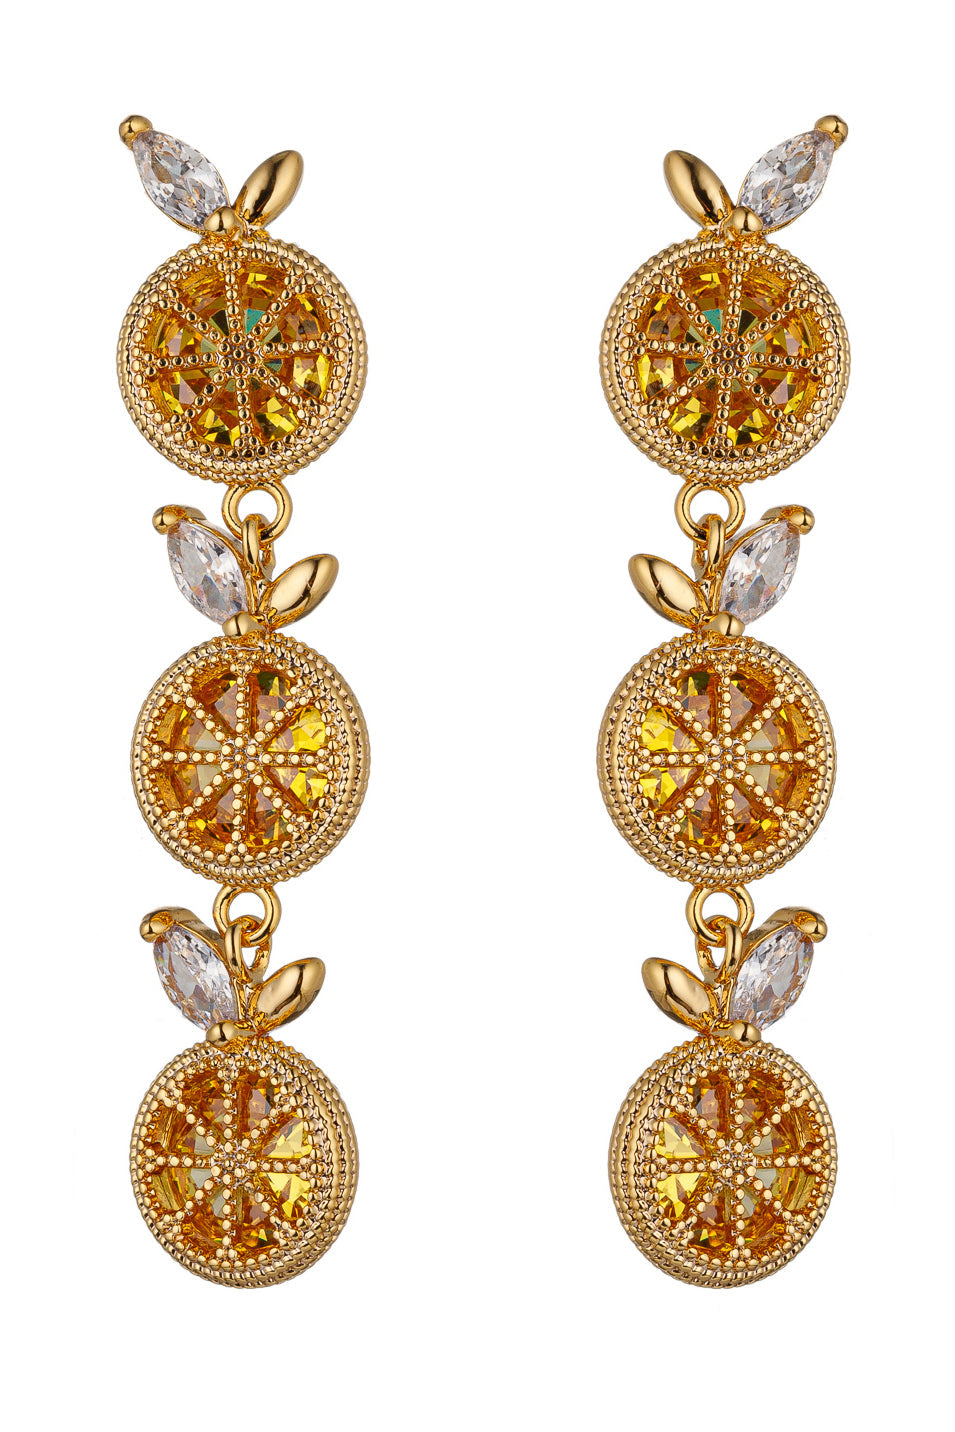 Embrace a burst of color with these drop earrings adorned with limoncello-hued cubic zirconia, adding vibrancy to your style.